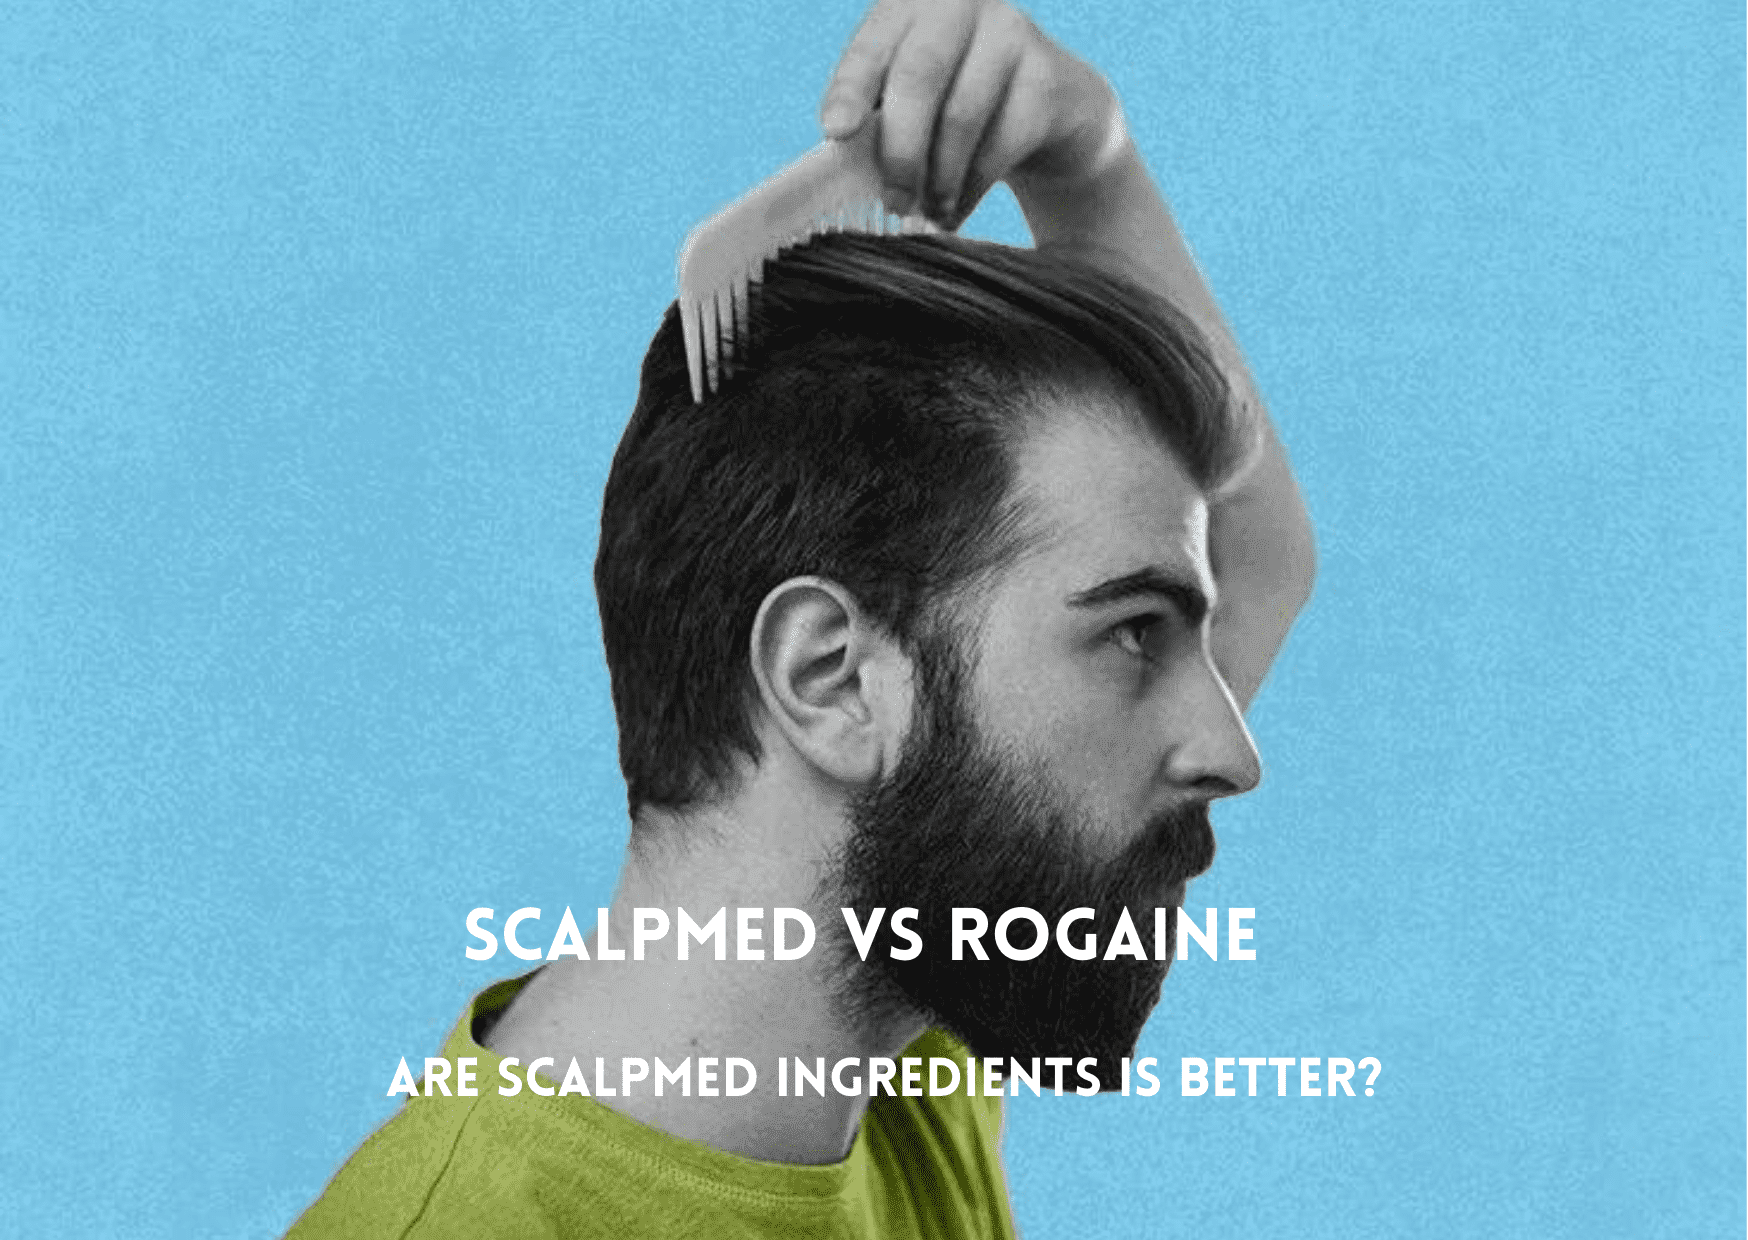 ScalpMed vs Rogaine? Are ScalpMed Ingredients Is Better?